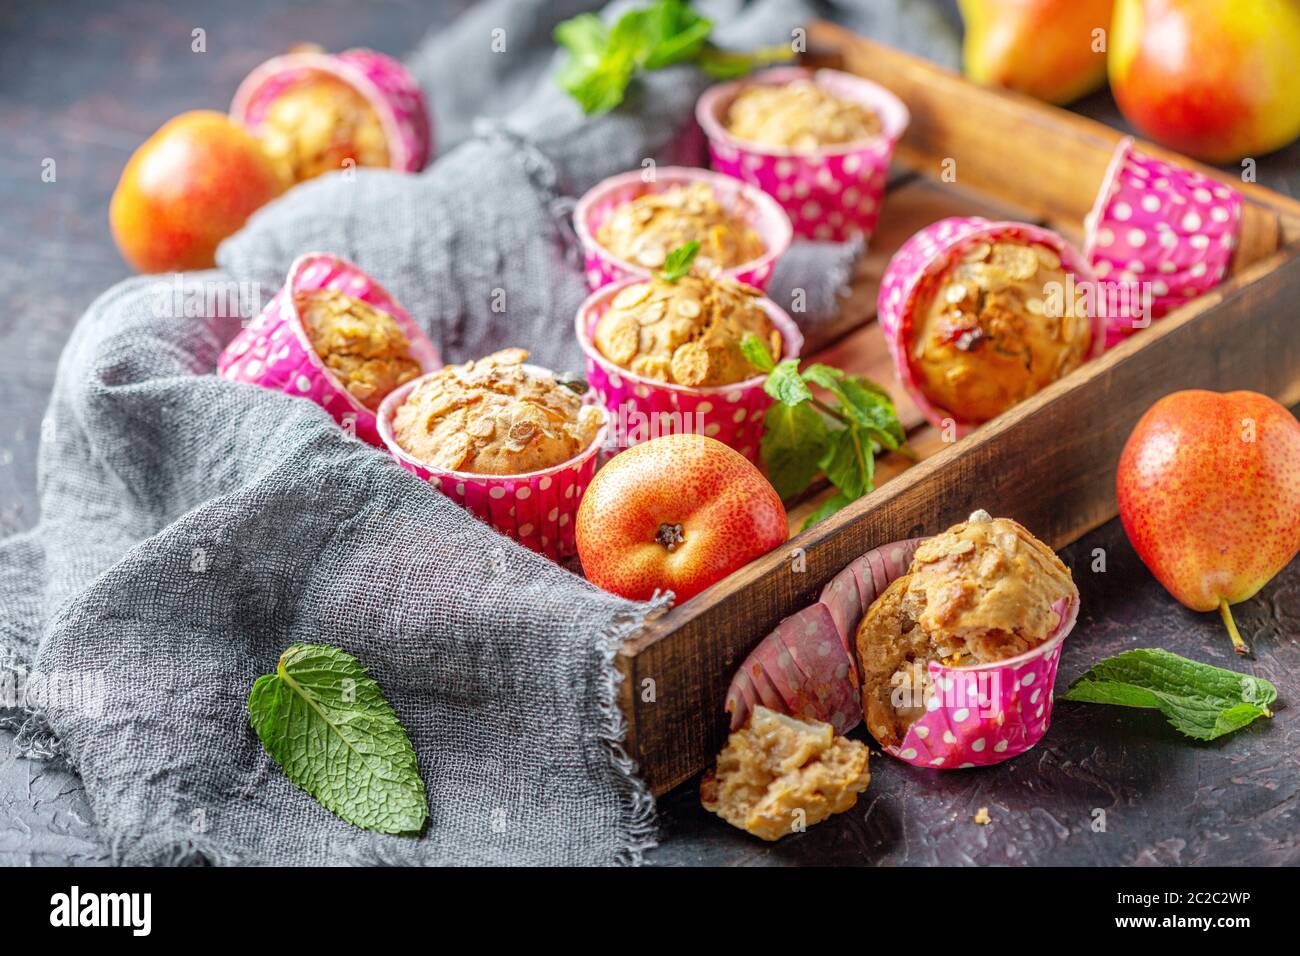 Muffins with pears and muesli in a wooden tray. Stock Photo